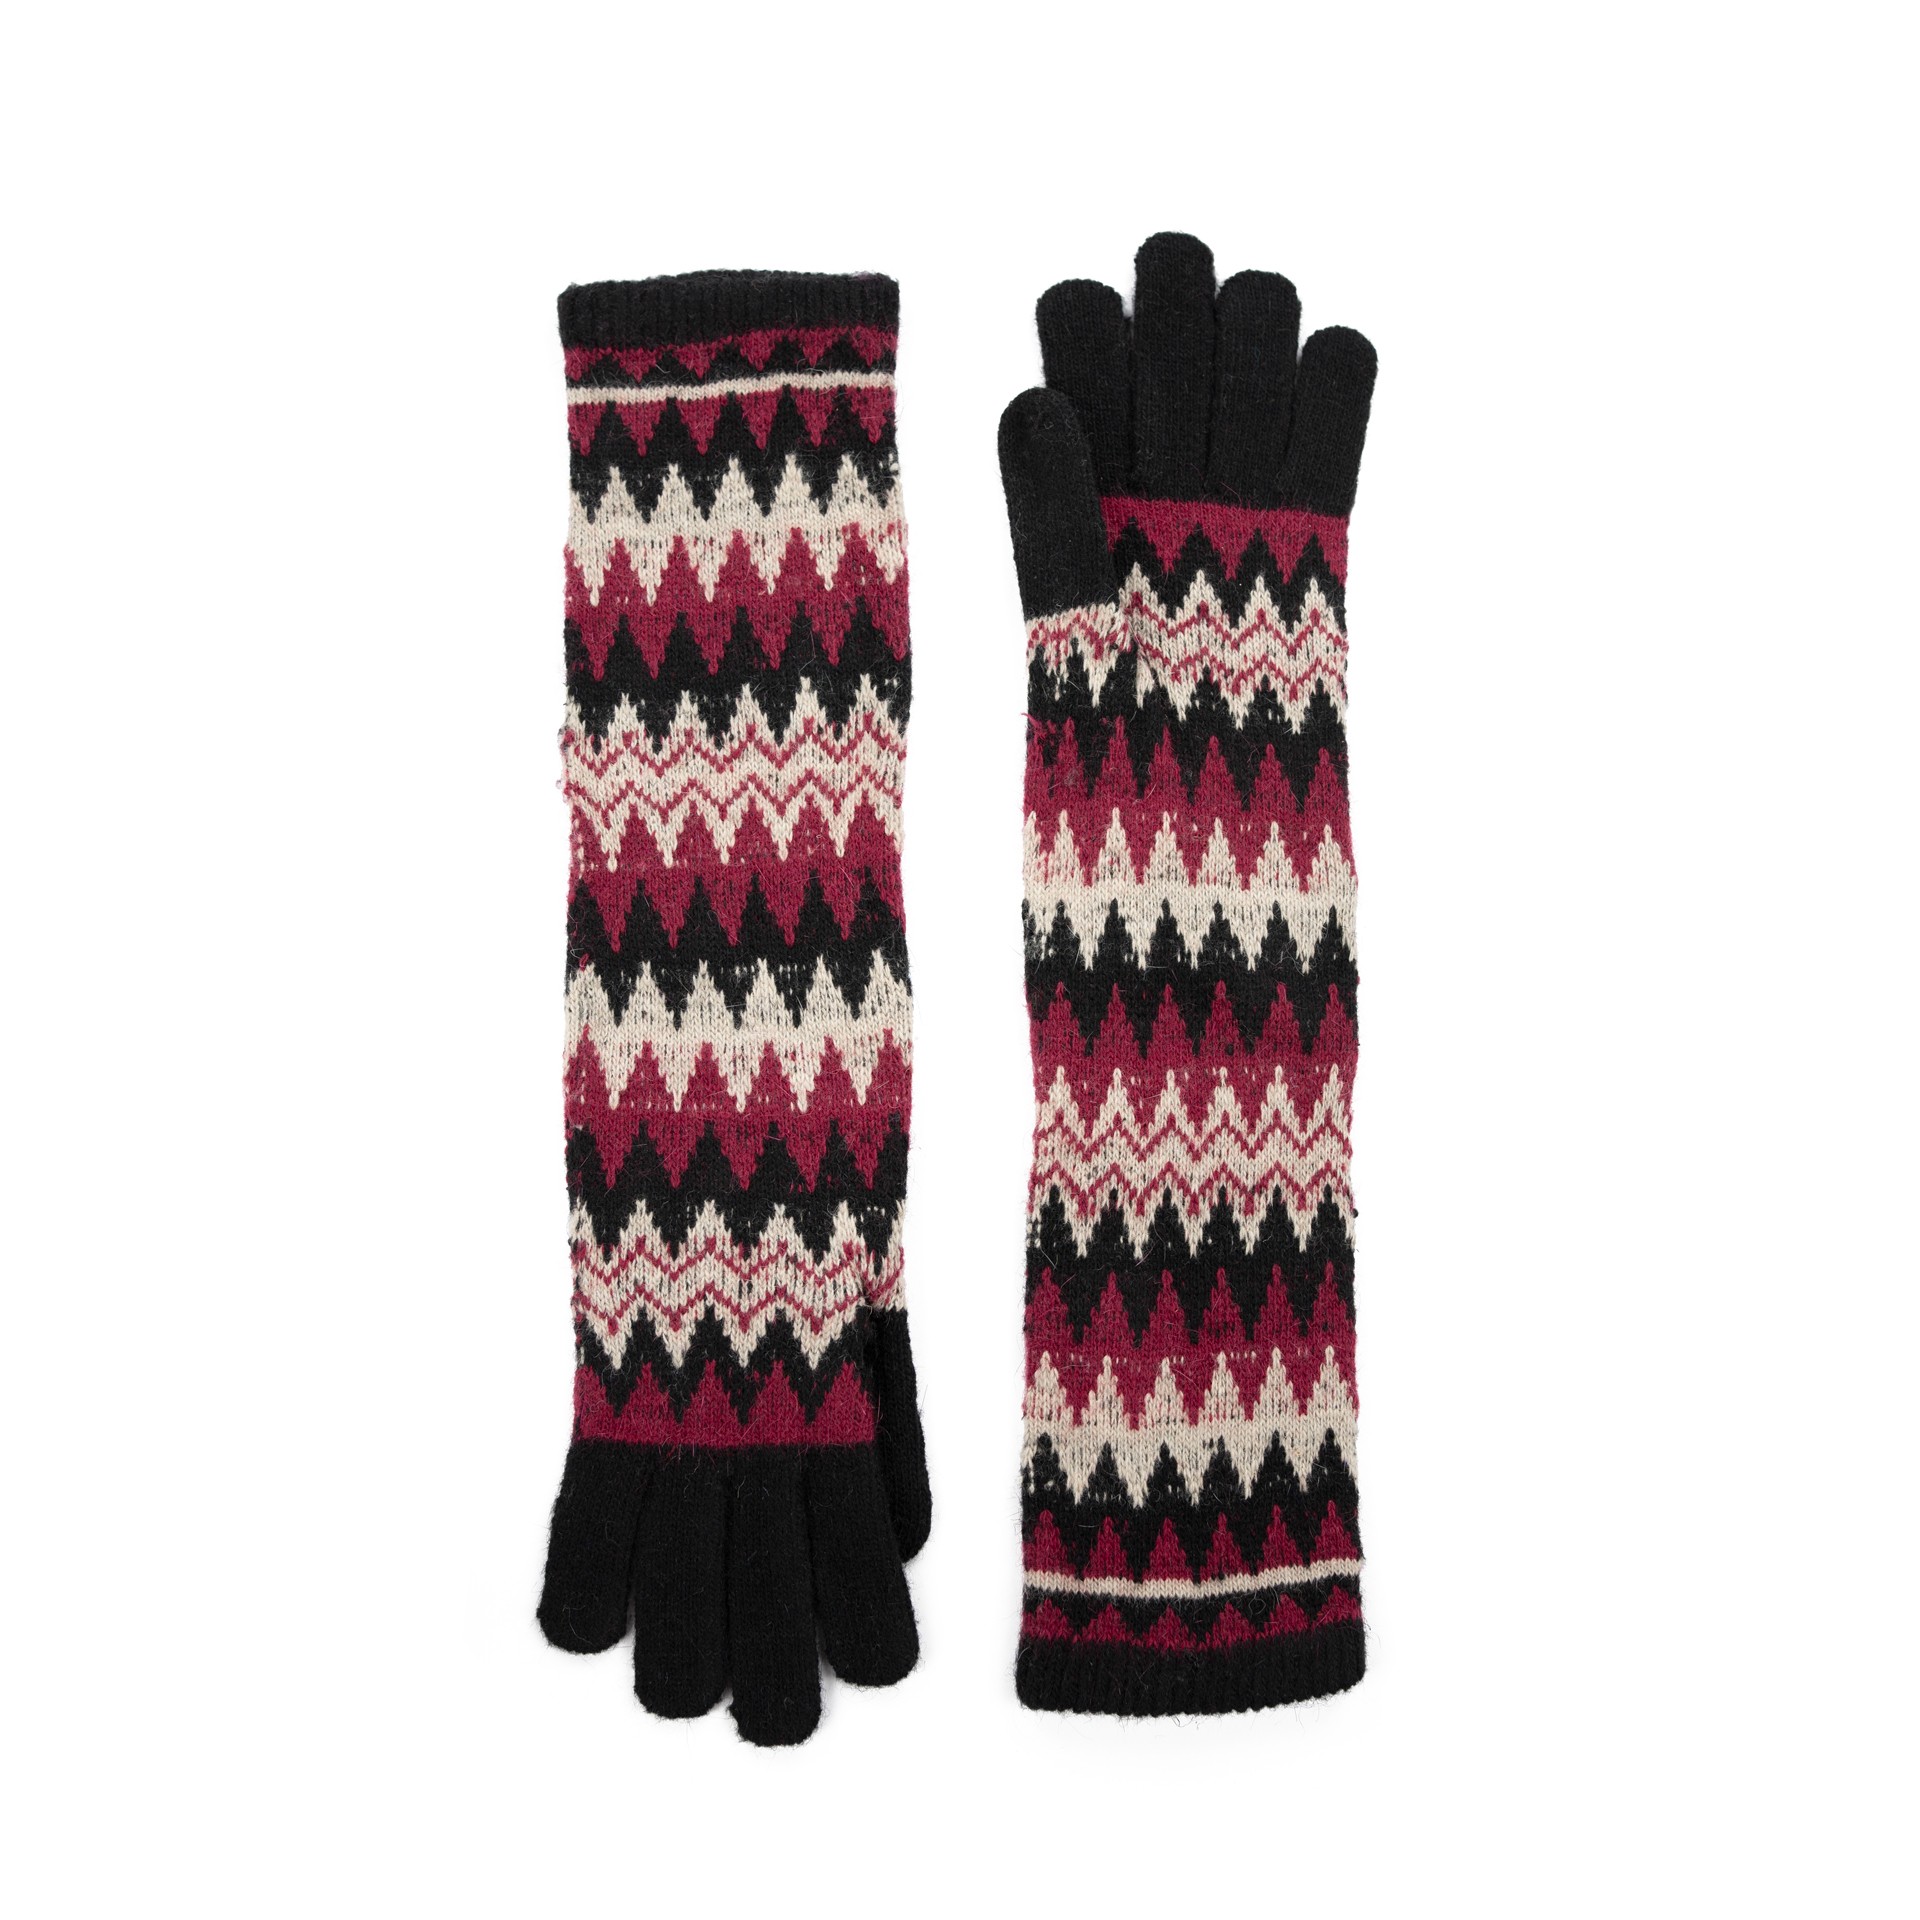 Art Of Polo Woman's Gloves rk2201-4